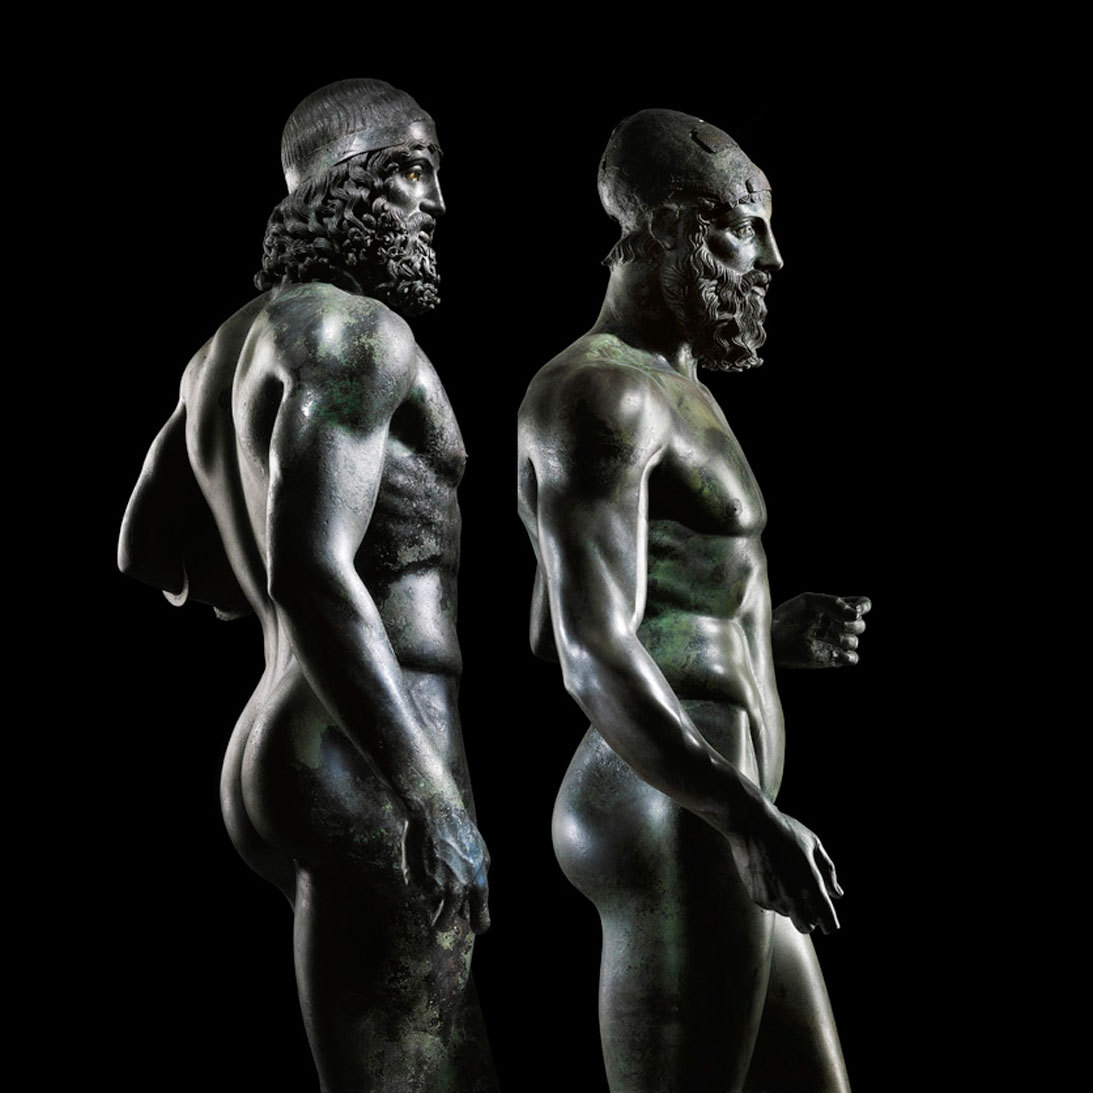 historyarchaeologyartefacts:The Riace Warriors, two full-size Greek bronzes of naked